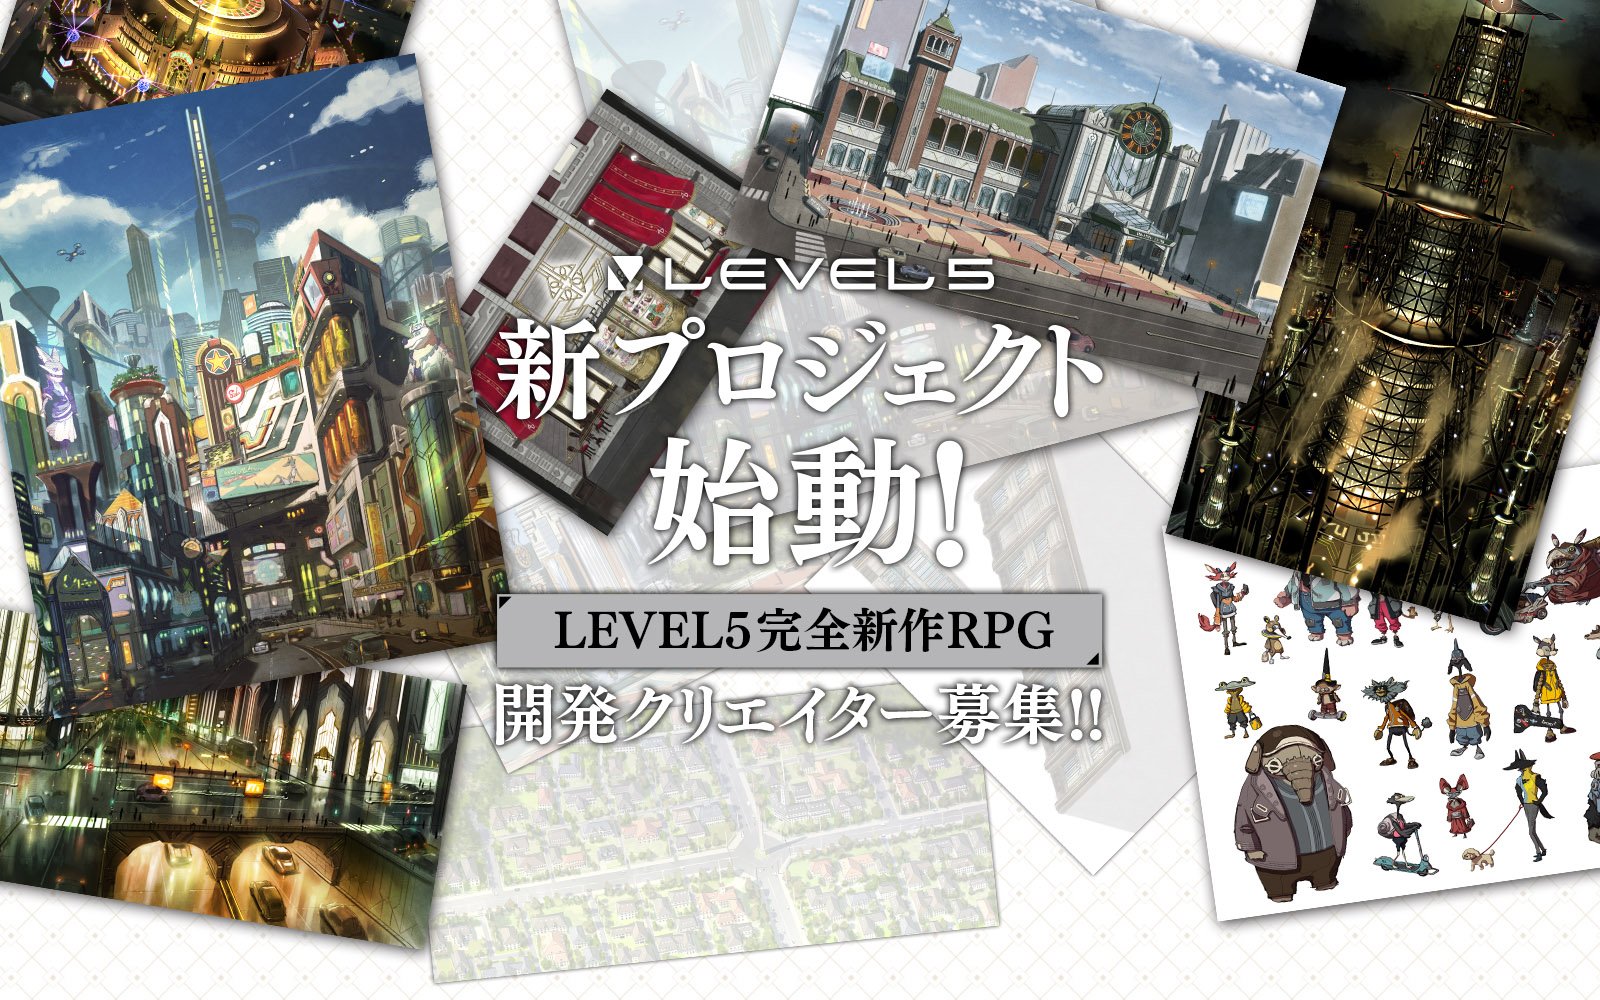 Level-5 recruiting staff for brand-new RPG project – Gematsu